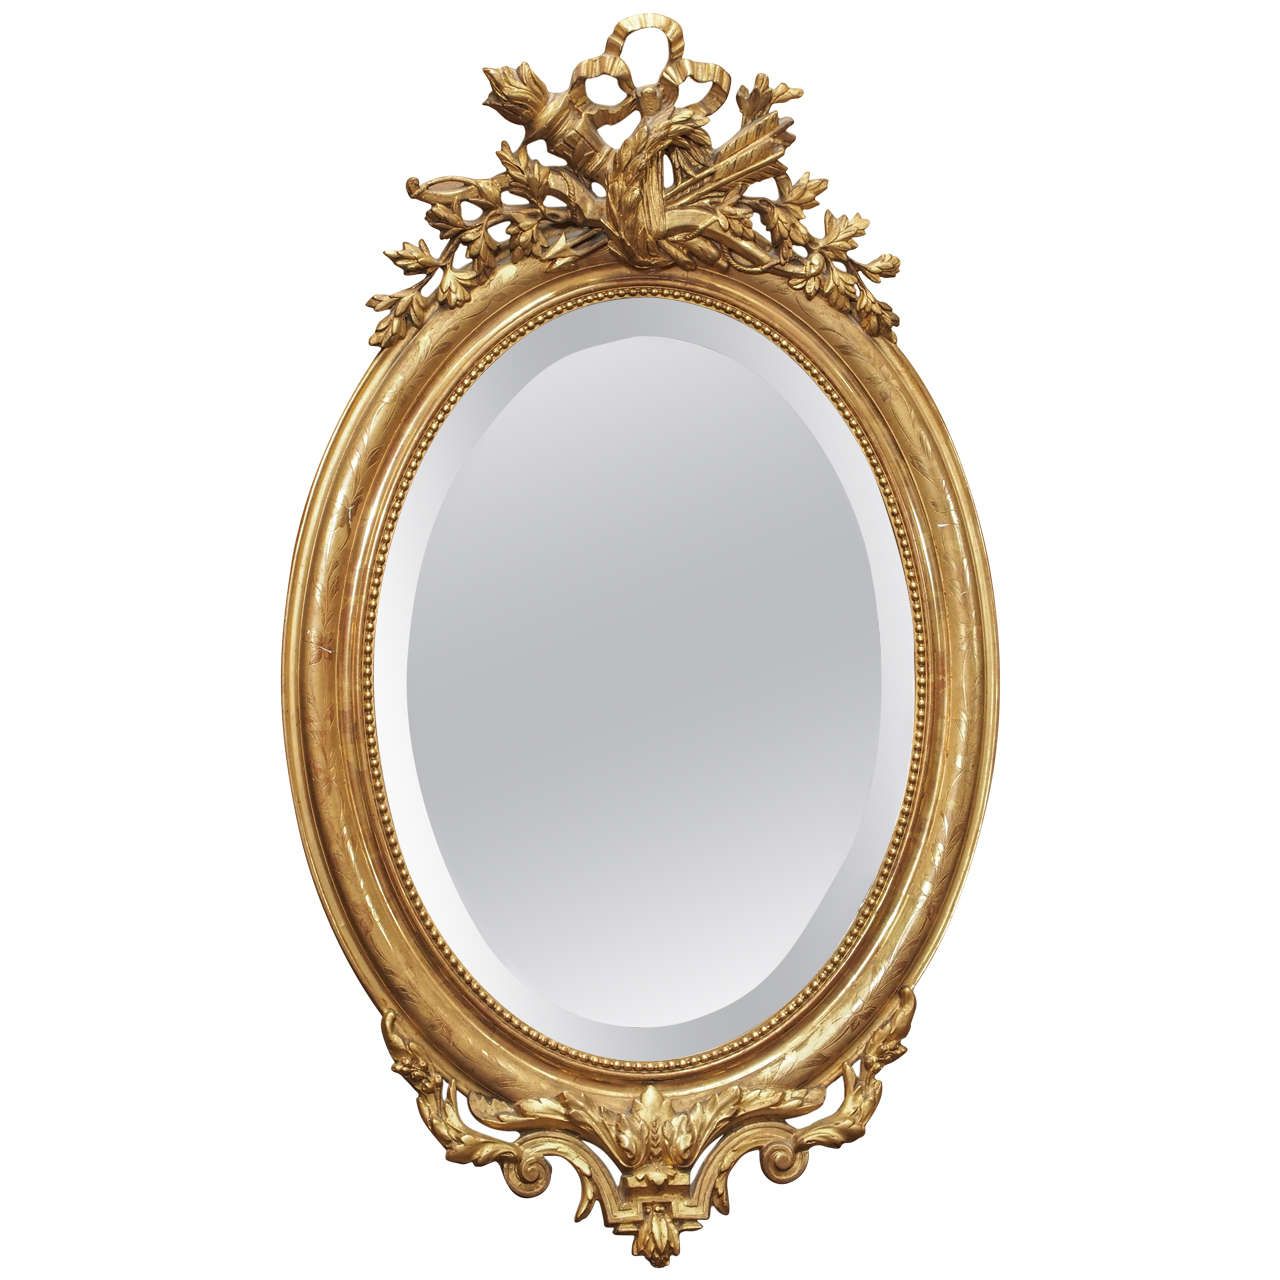 Lovely Oval Antique French Gold Beveled Mirror Circa 1850 At 1stdibs Within Antique Gold Scallop Wall Mirrors (View 6 of 15)